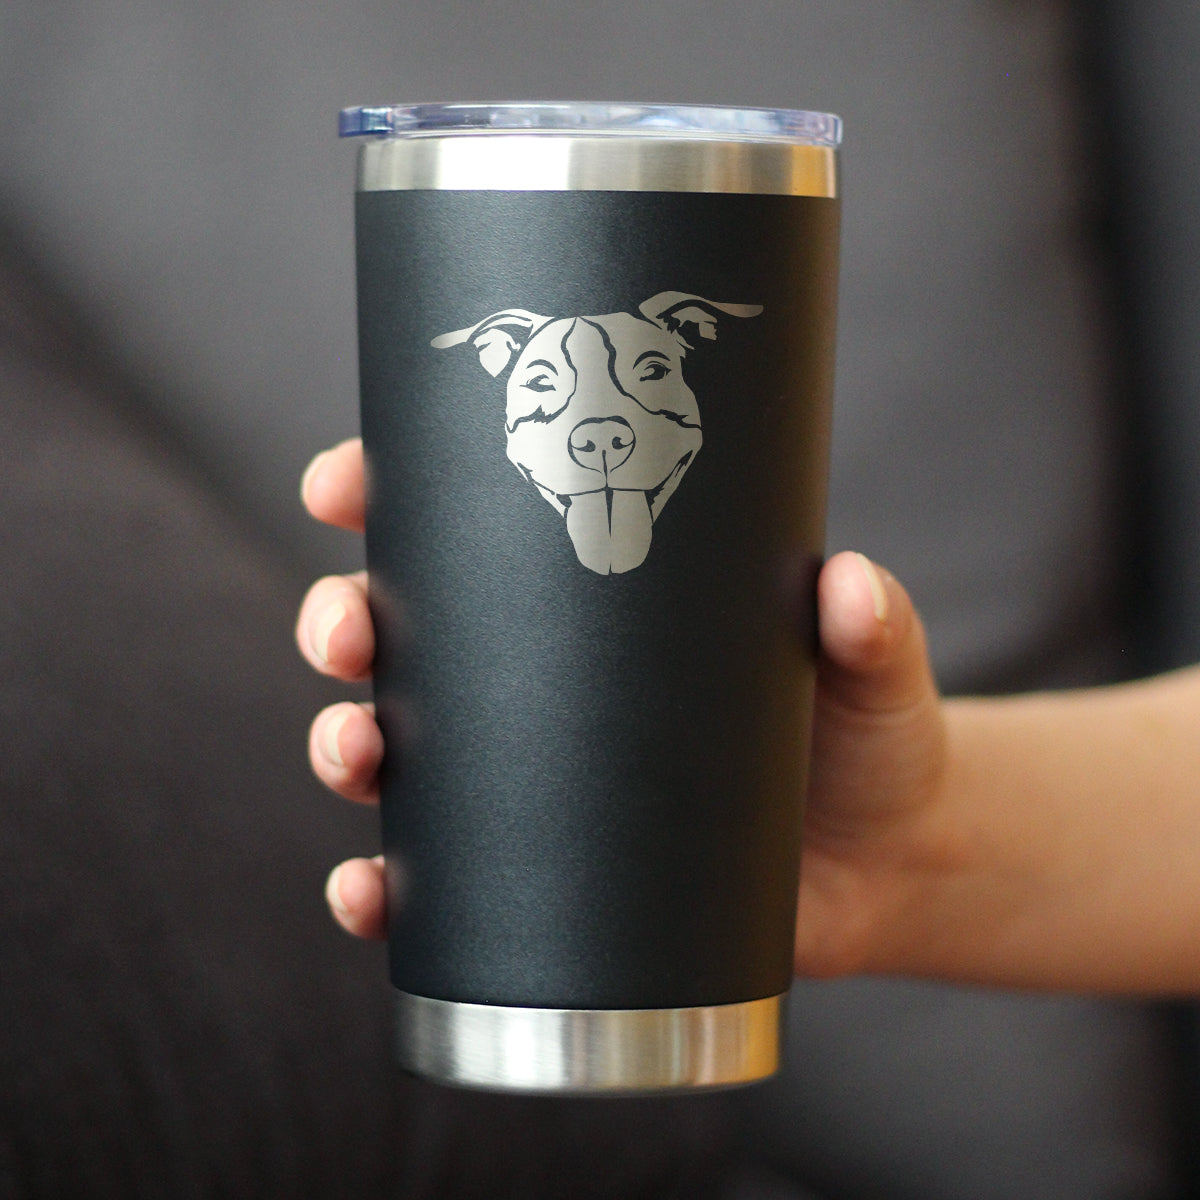 Happy Pitbull - Insulated Coffee Tumbler Cup with Sliding Lid - Stainless Steel Insulated Mug - Cute Pitbull Themed Dog Gifts and Party Decor for Women and Men